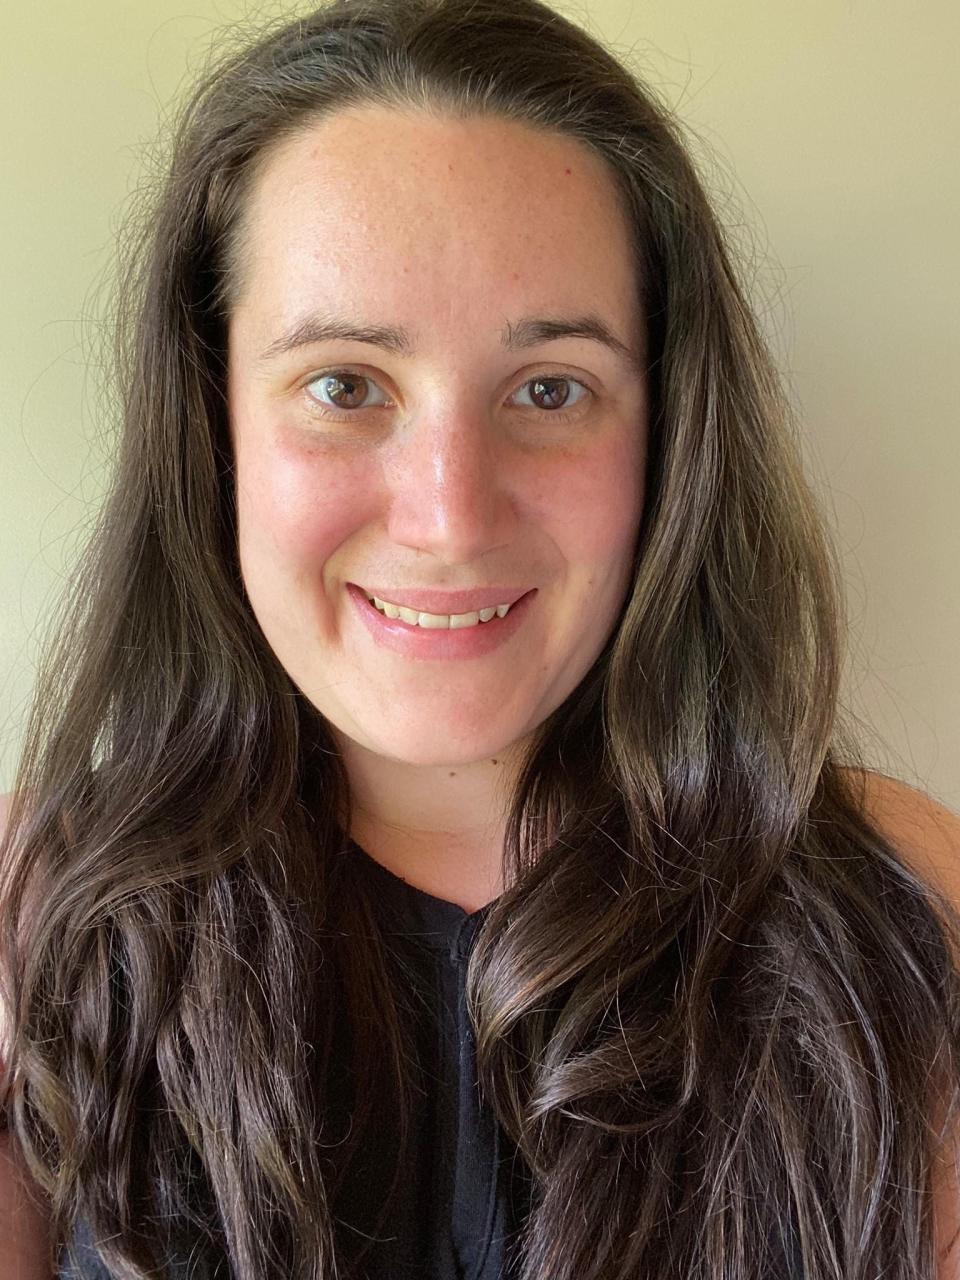 Kristin Zenz opened her home business, Chozzie's Bakery, in May 2022. She creates and sells cookies, cakes, cinnamon rolls, scones and more. Zenz also works for Milwaukee Public Schools and began selling her baked goods at the Menomonee Falls Farmers Market.